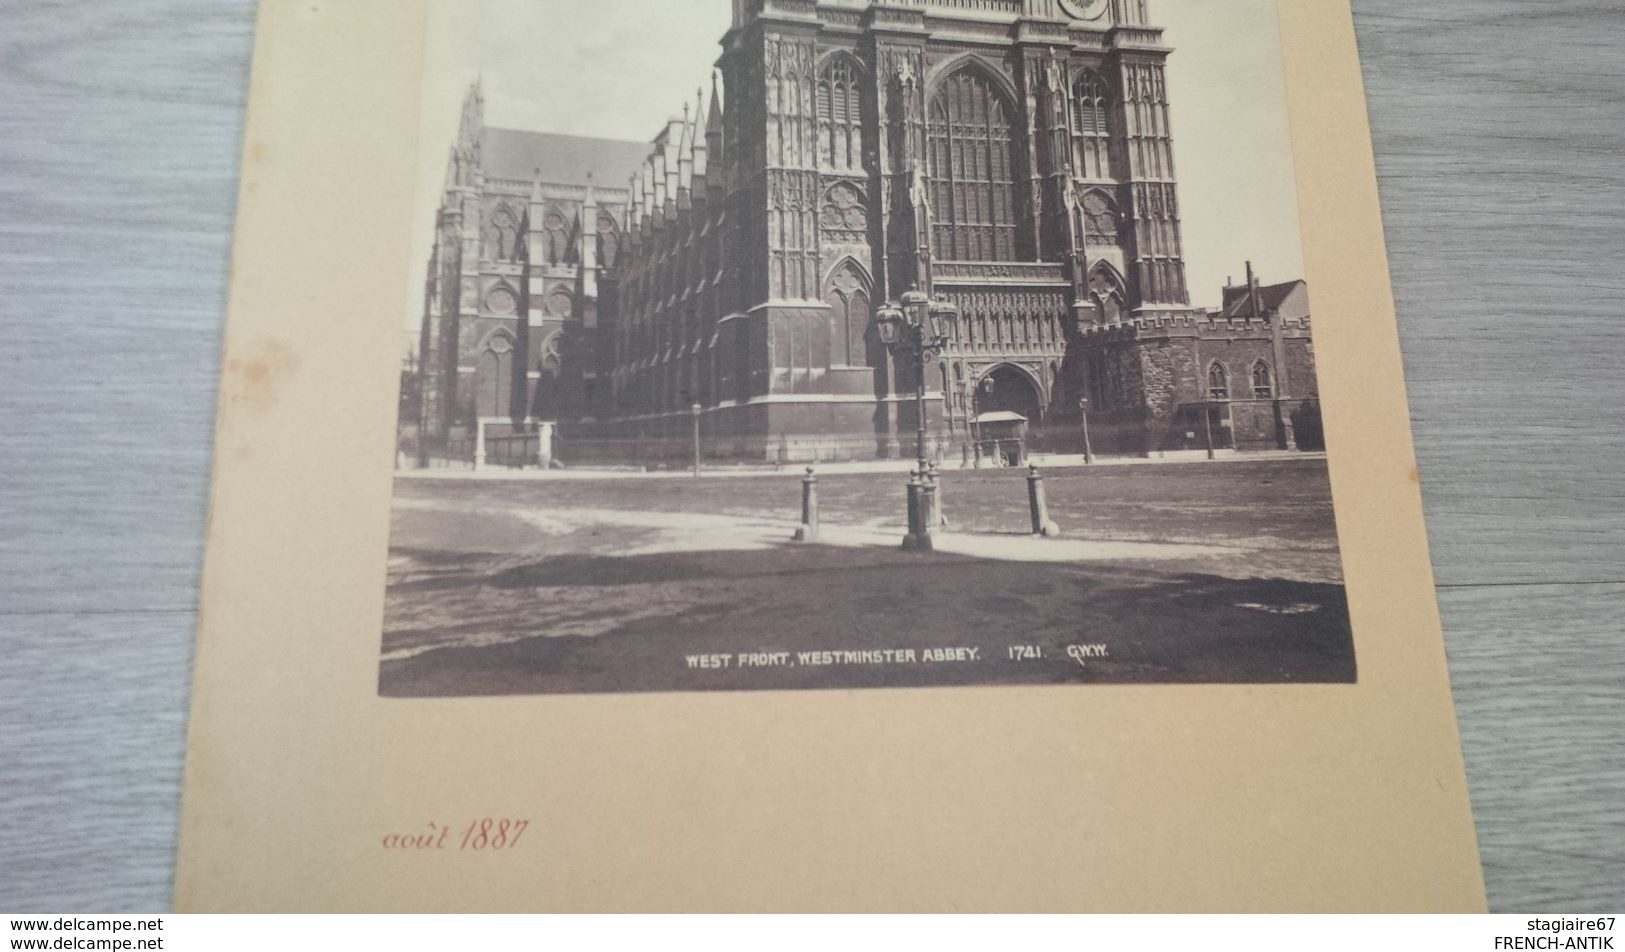 PHOTO 1887 WEST FRONT WESTMINSTER ABBEY G.W.W - Old (before 1900)